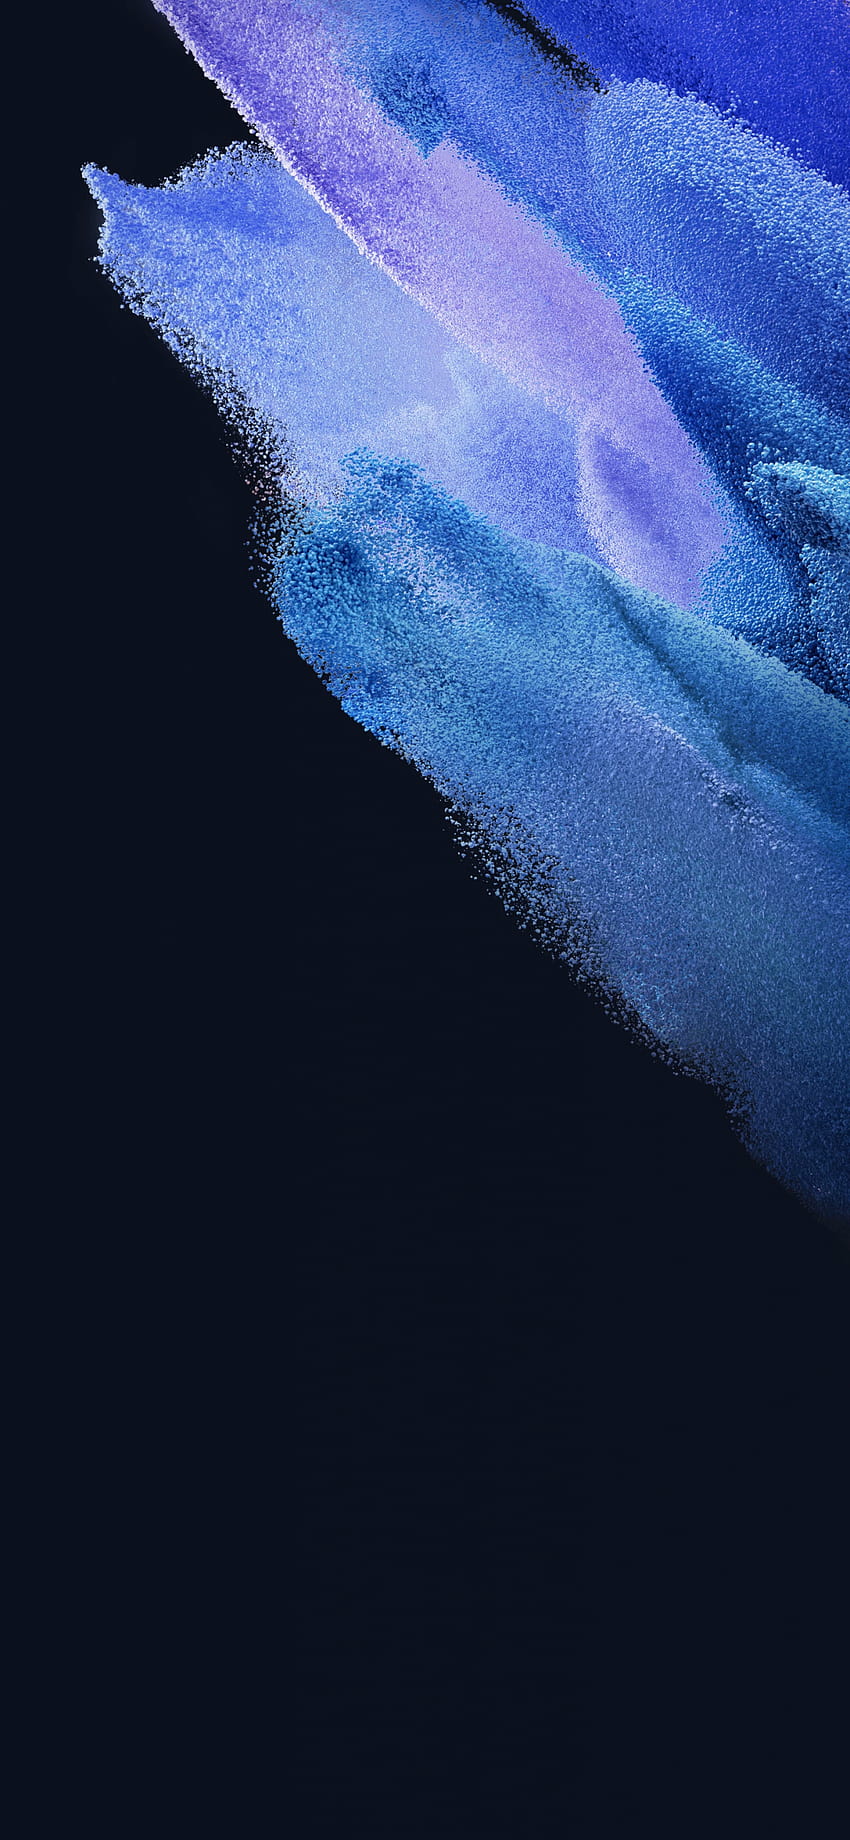 Samsung Galaxy S21 , Stock, AMOLED, Particles, Blue, Black background, Abstract, samsung mobile HD phone wallpaper